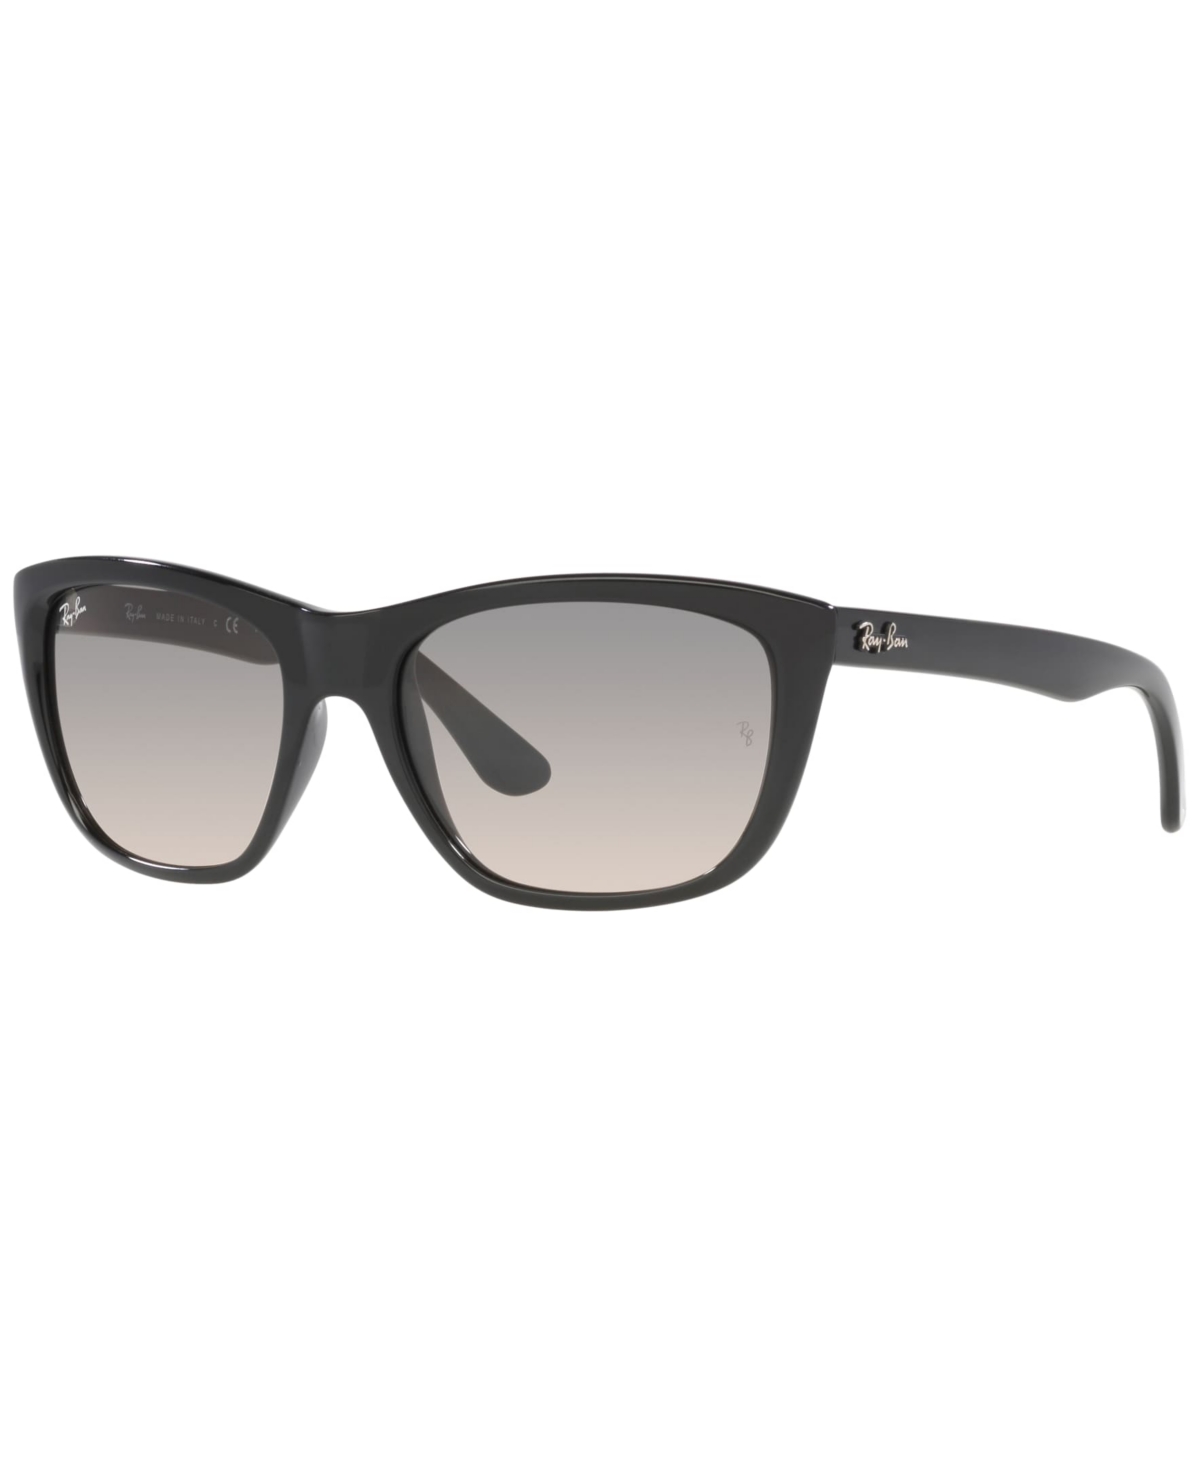 Ray Ban Women's Sunglasses, Rb4154 In Black